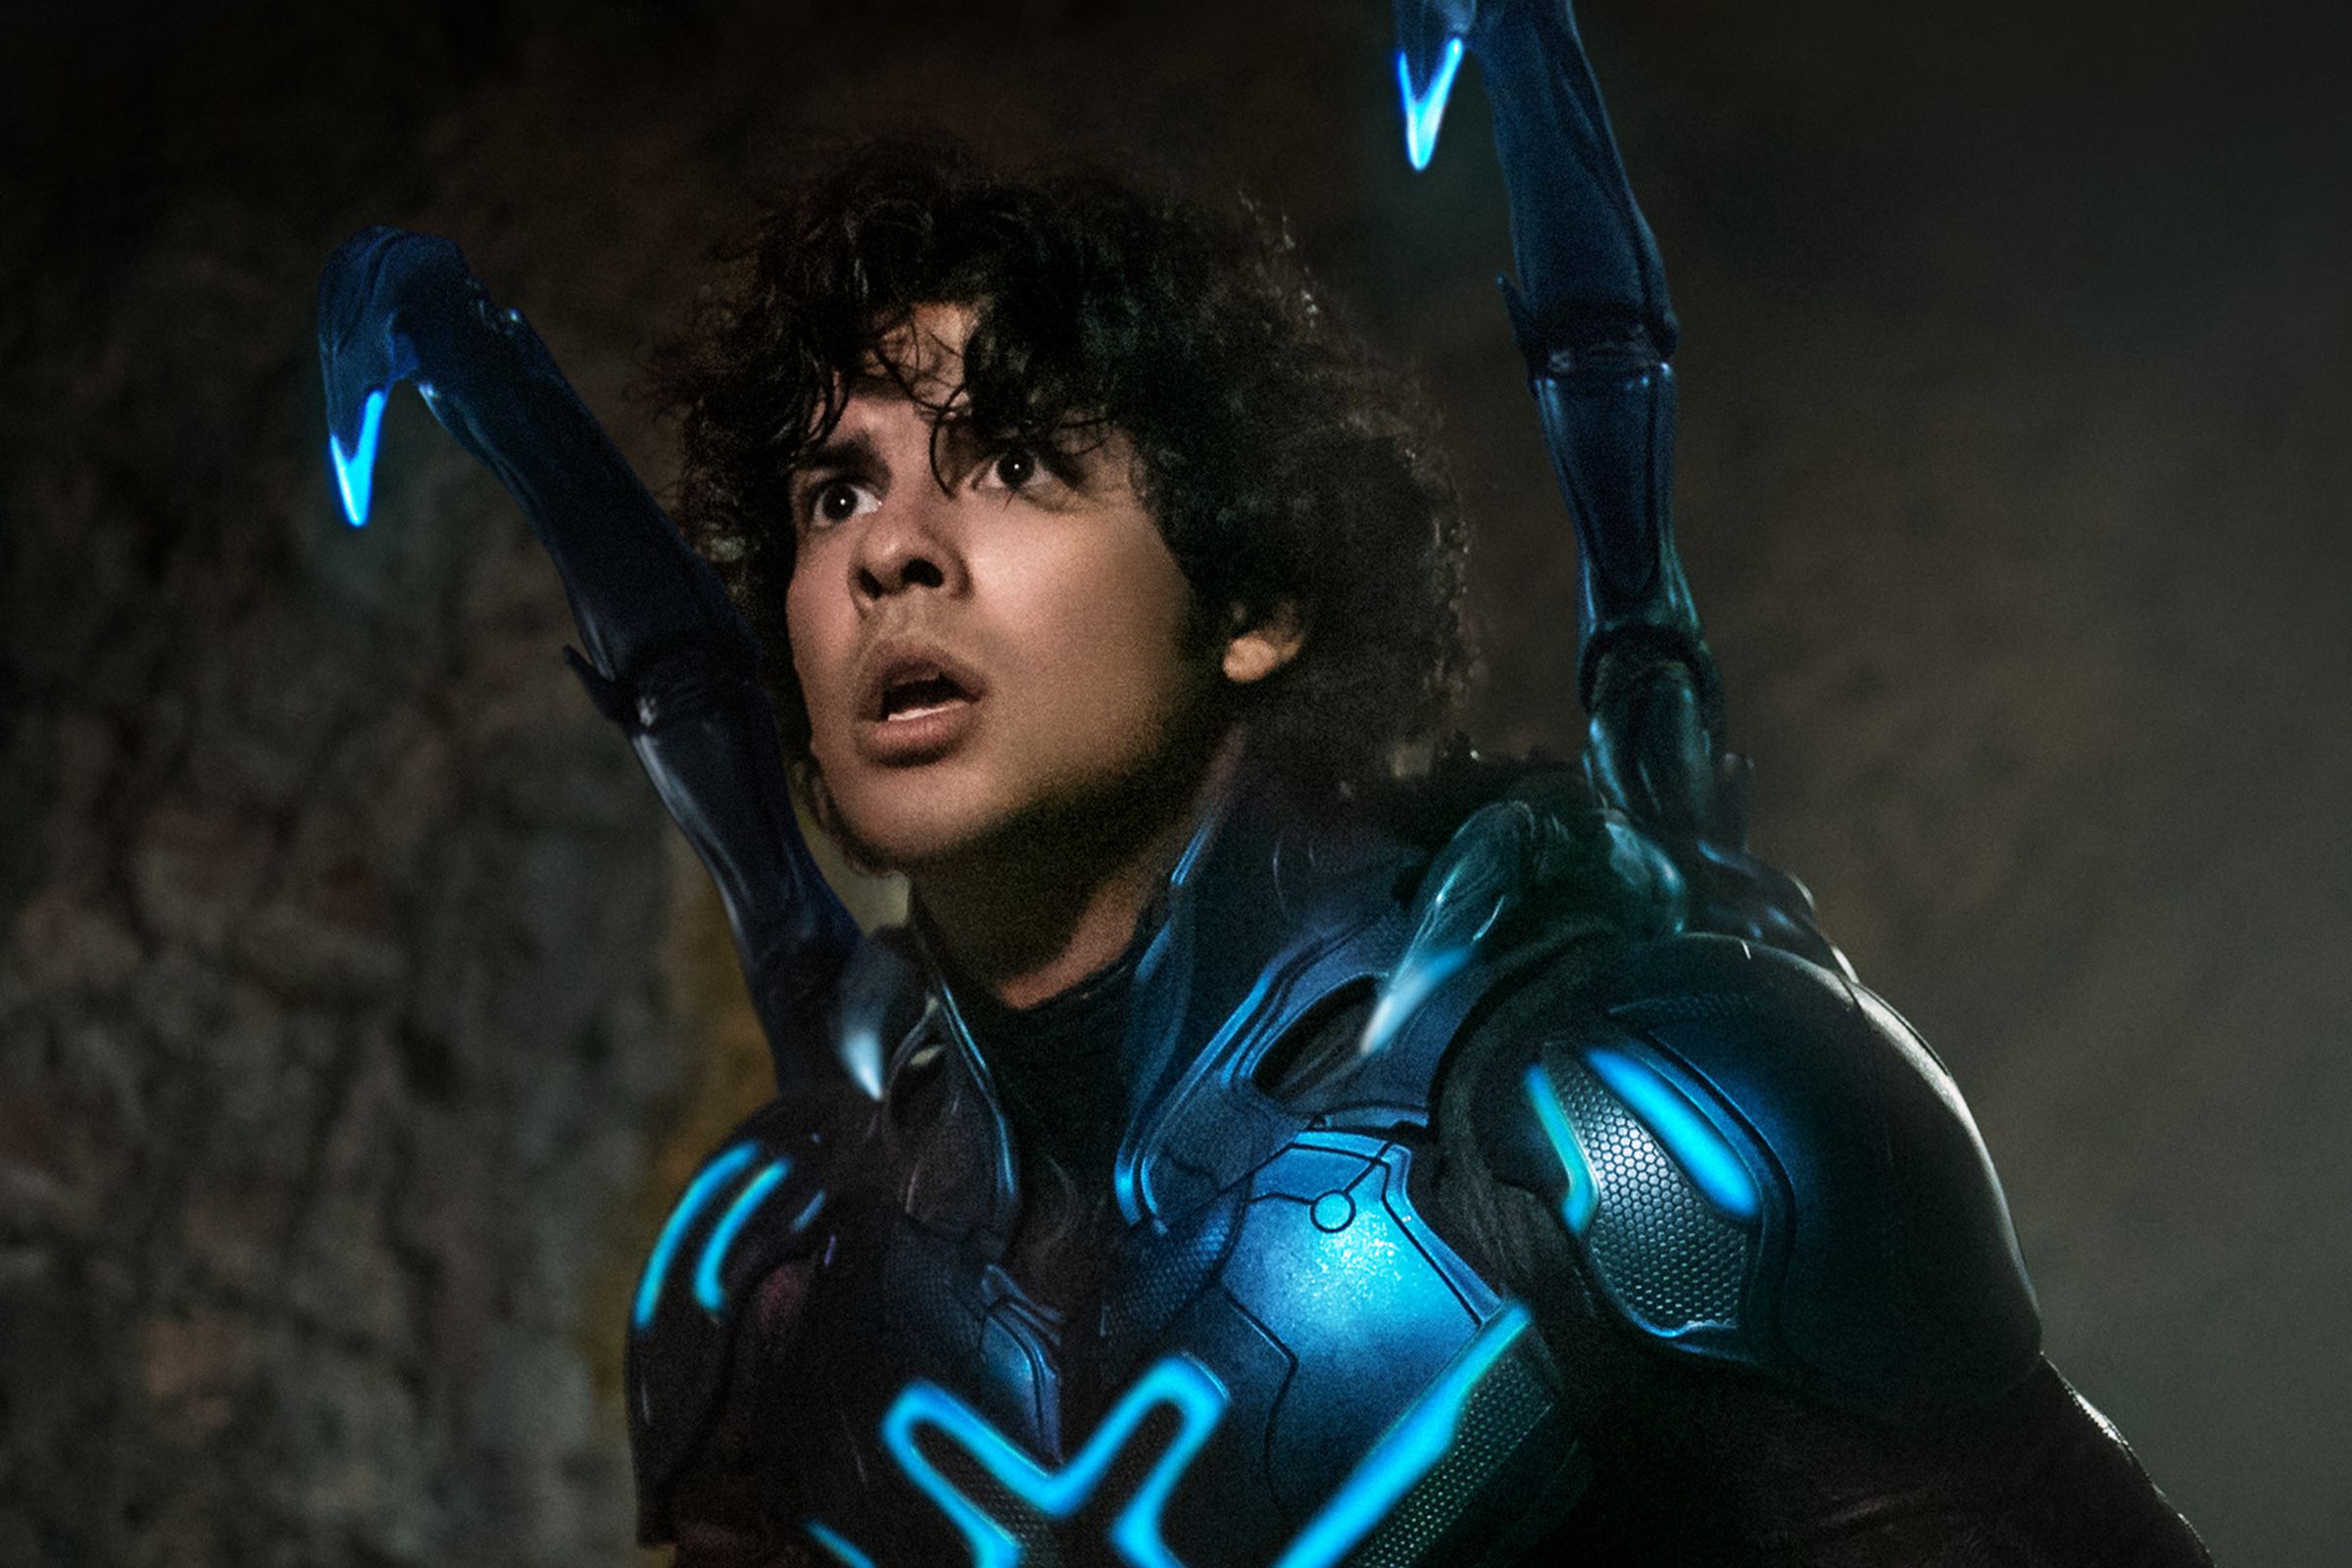 A young man in a dark blue form-fitting exoskeleton adorned with glowing neon pining across the chest.